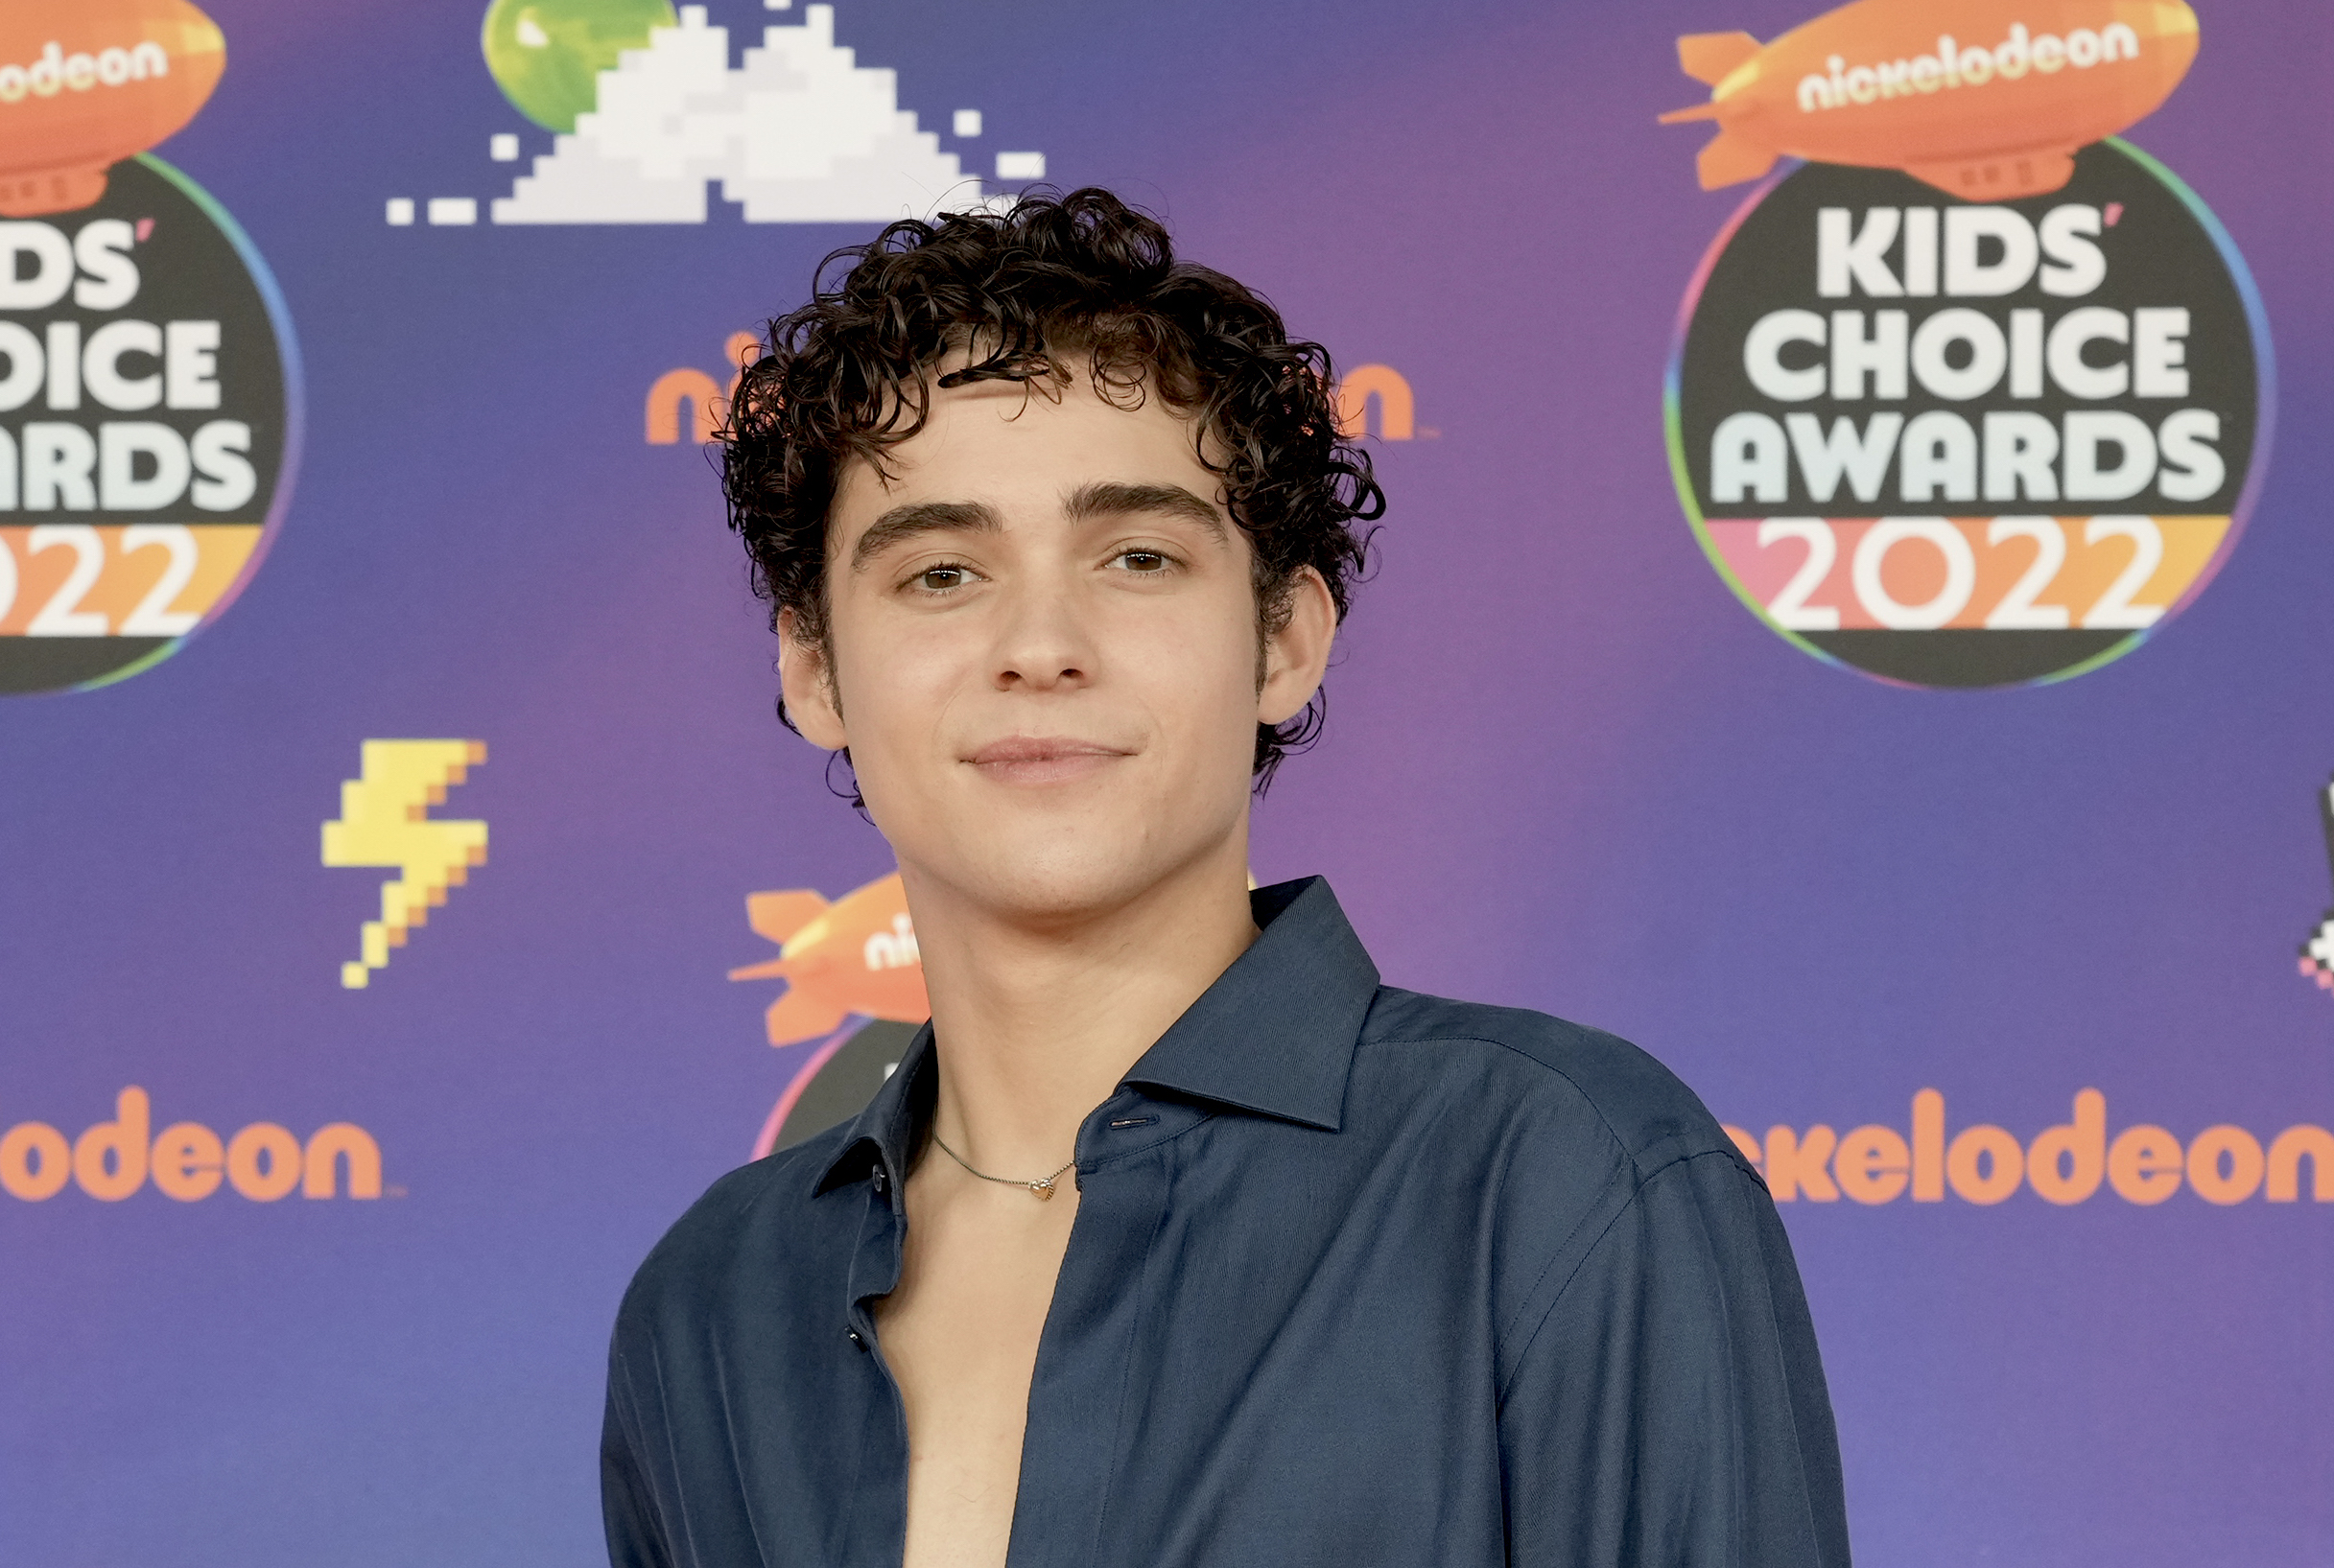 Disney Star Asserts Christian Faith At Kids’ Choice Awards: ‘There’s A Very Real God Who Loves You’